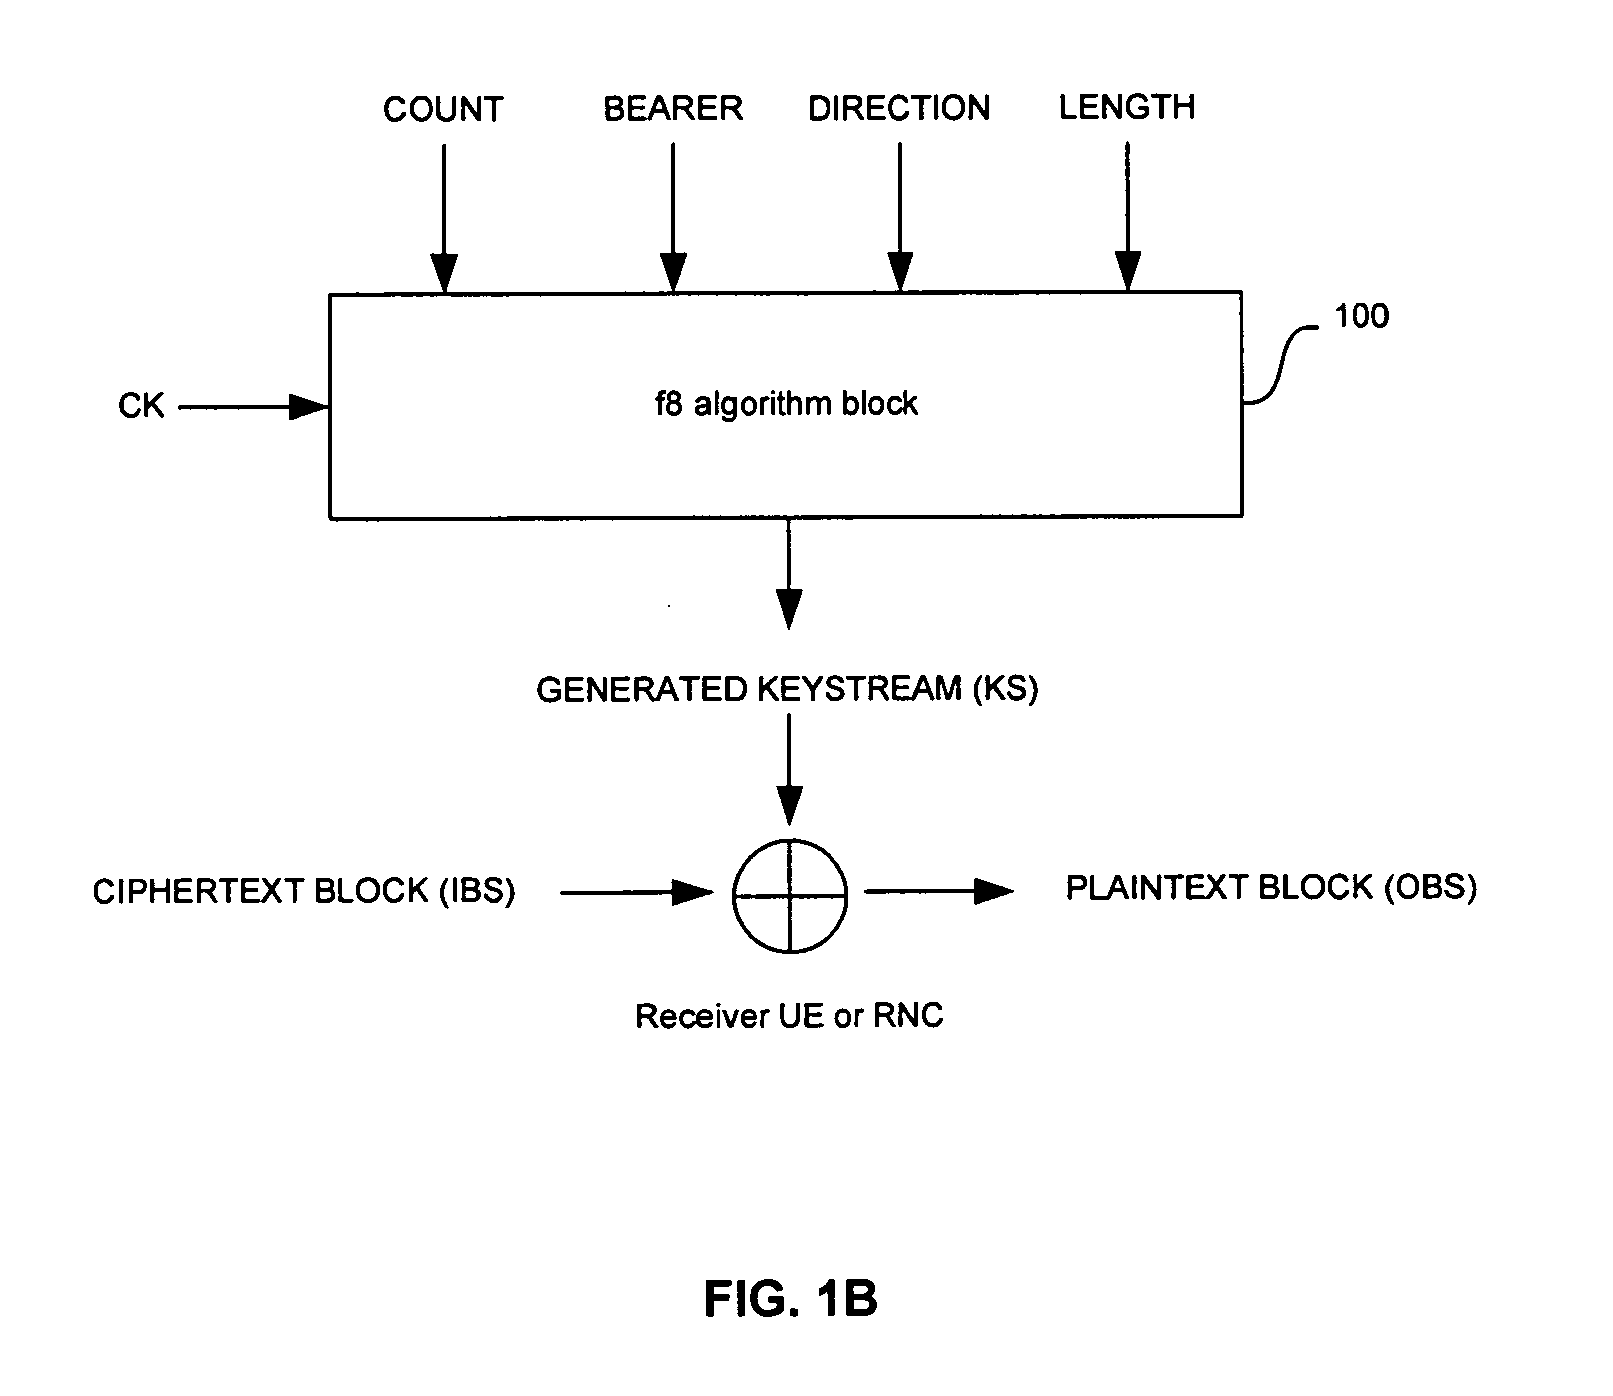 Method and system for hardware accelerator for implementing f8 confidentiality algorithm in WCDMA compliant handsets